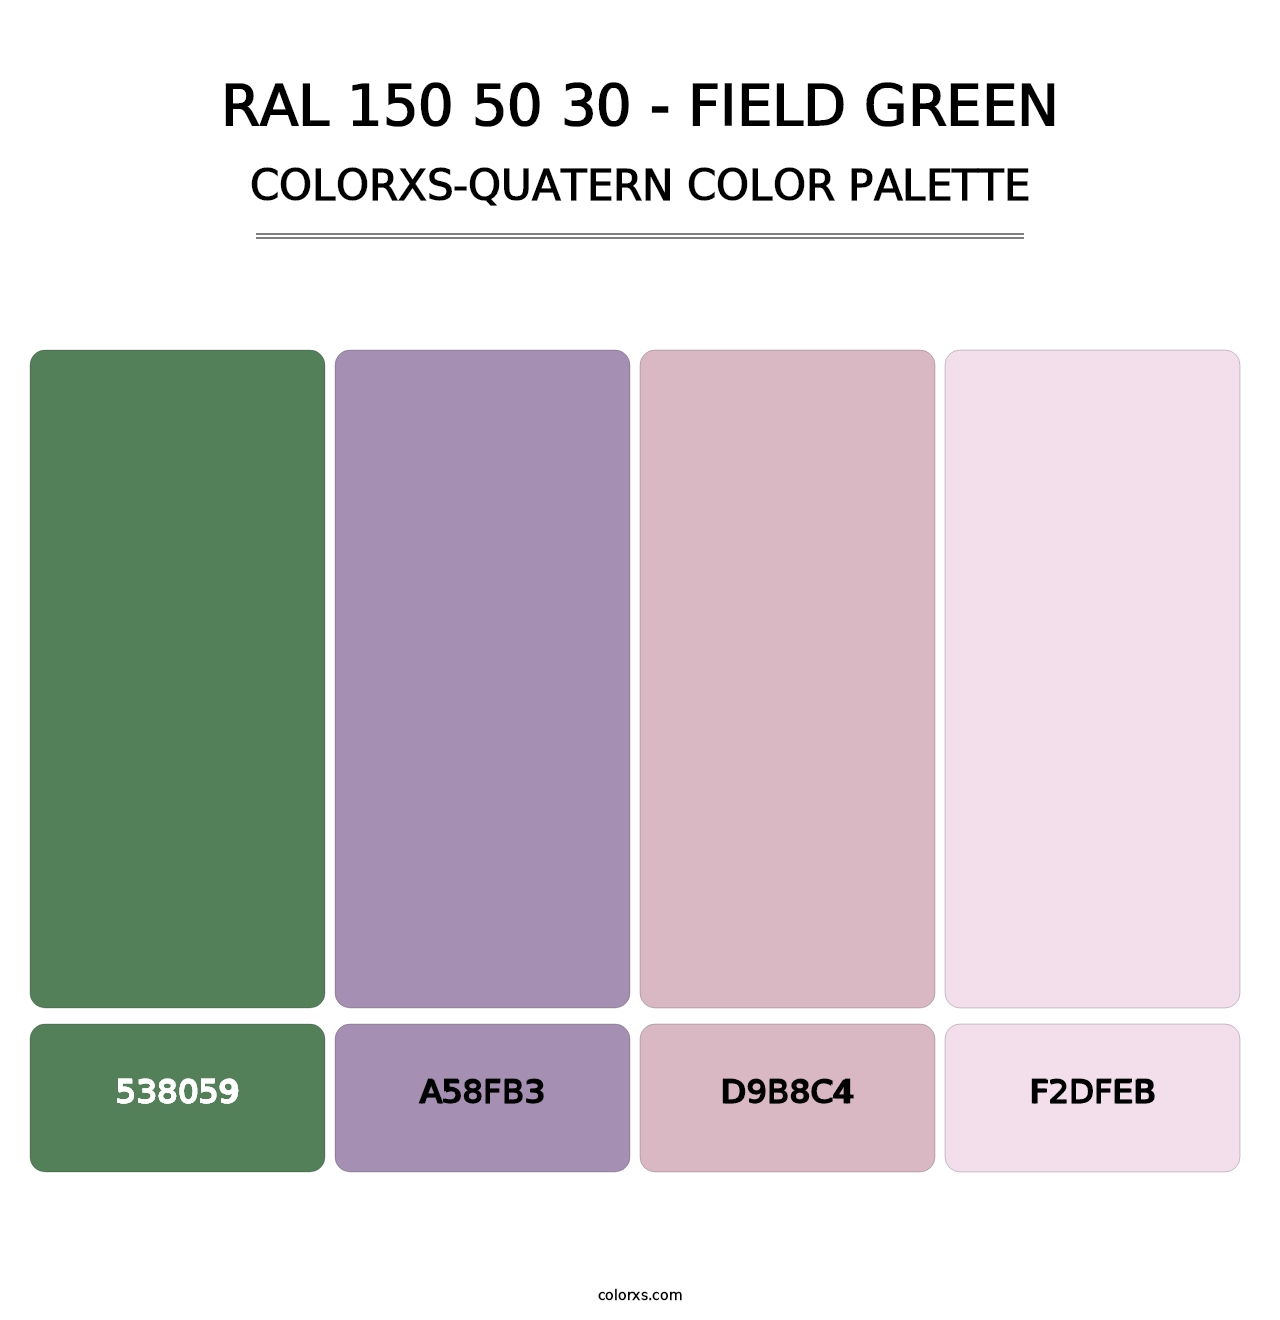 RAL 150 50 30 - Field Green - Colorxs Quatern Palette